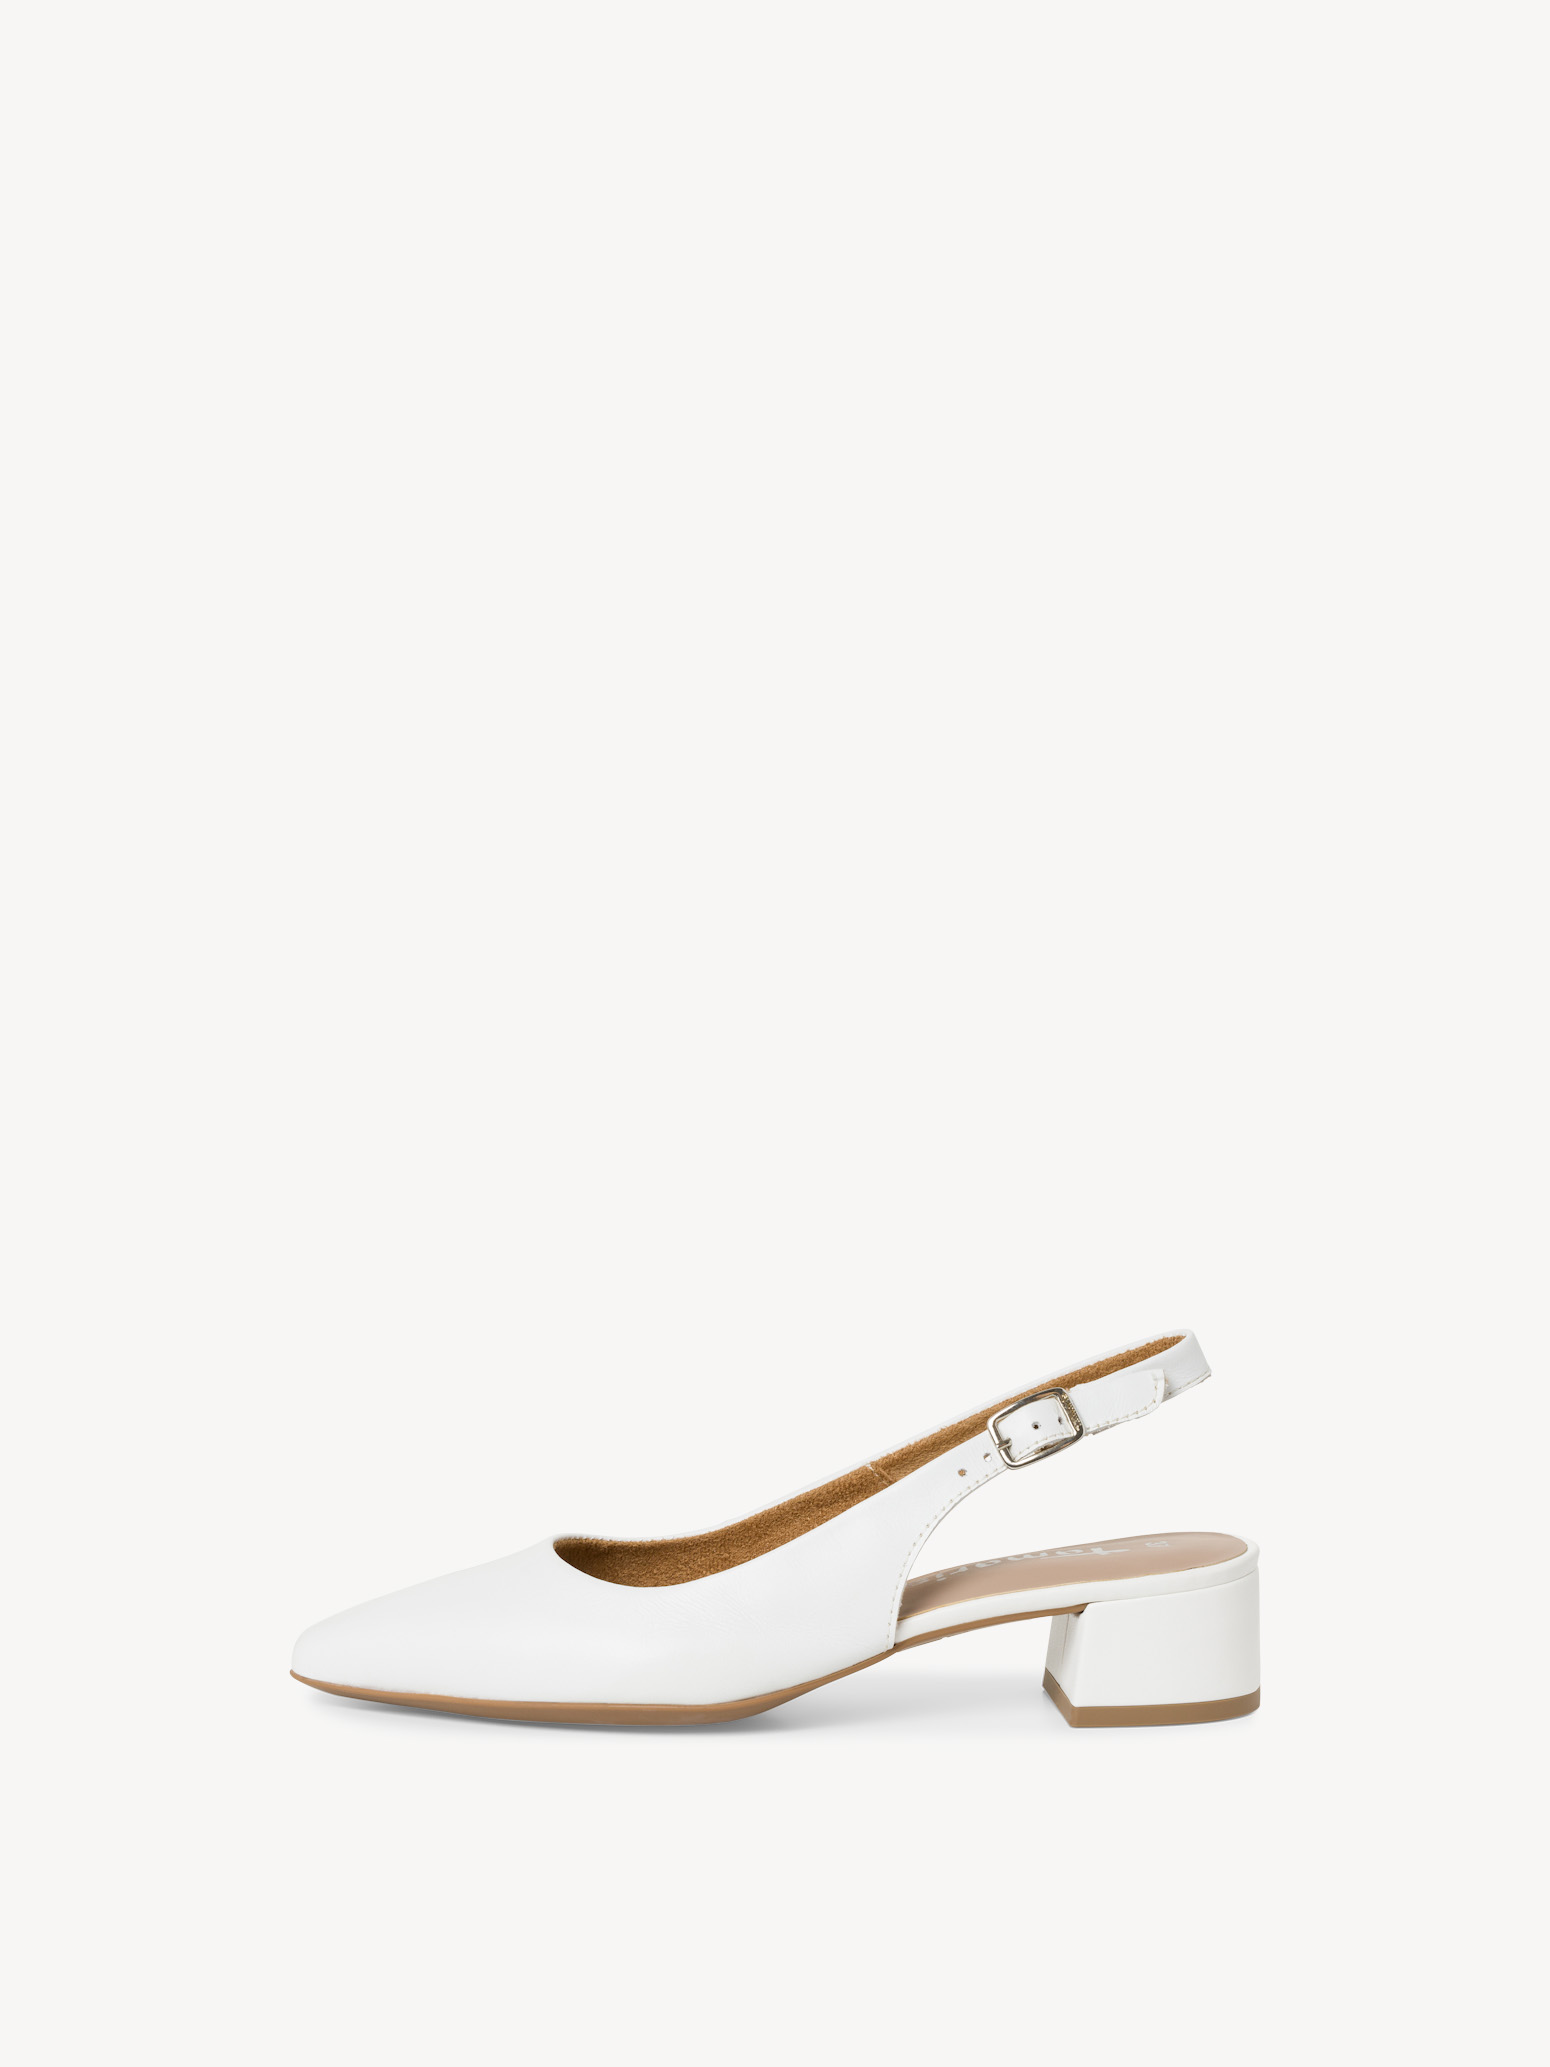 Leather sling pumps - white